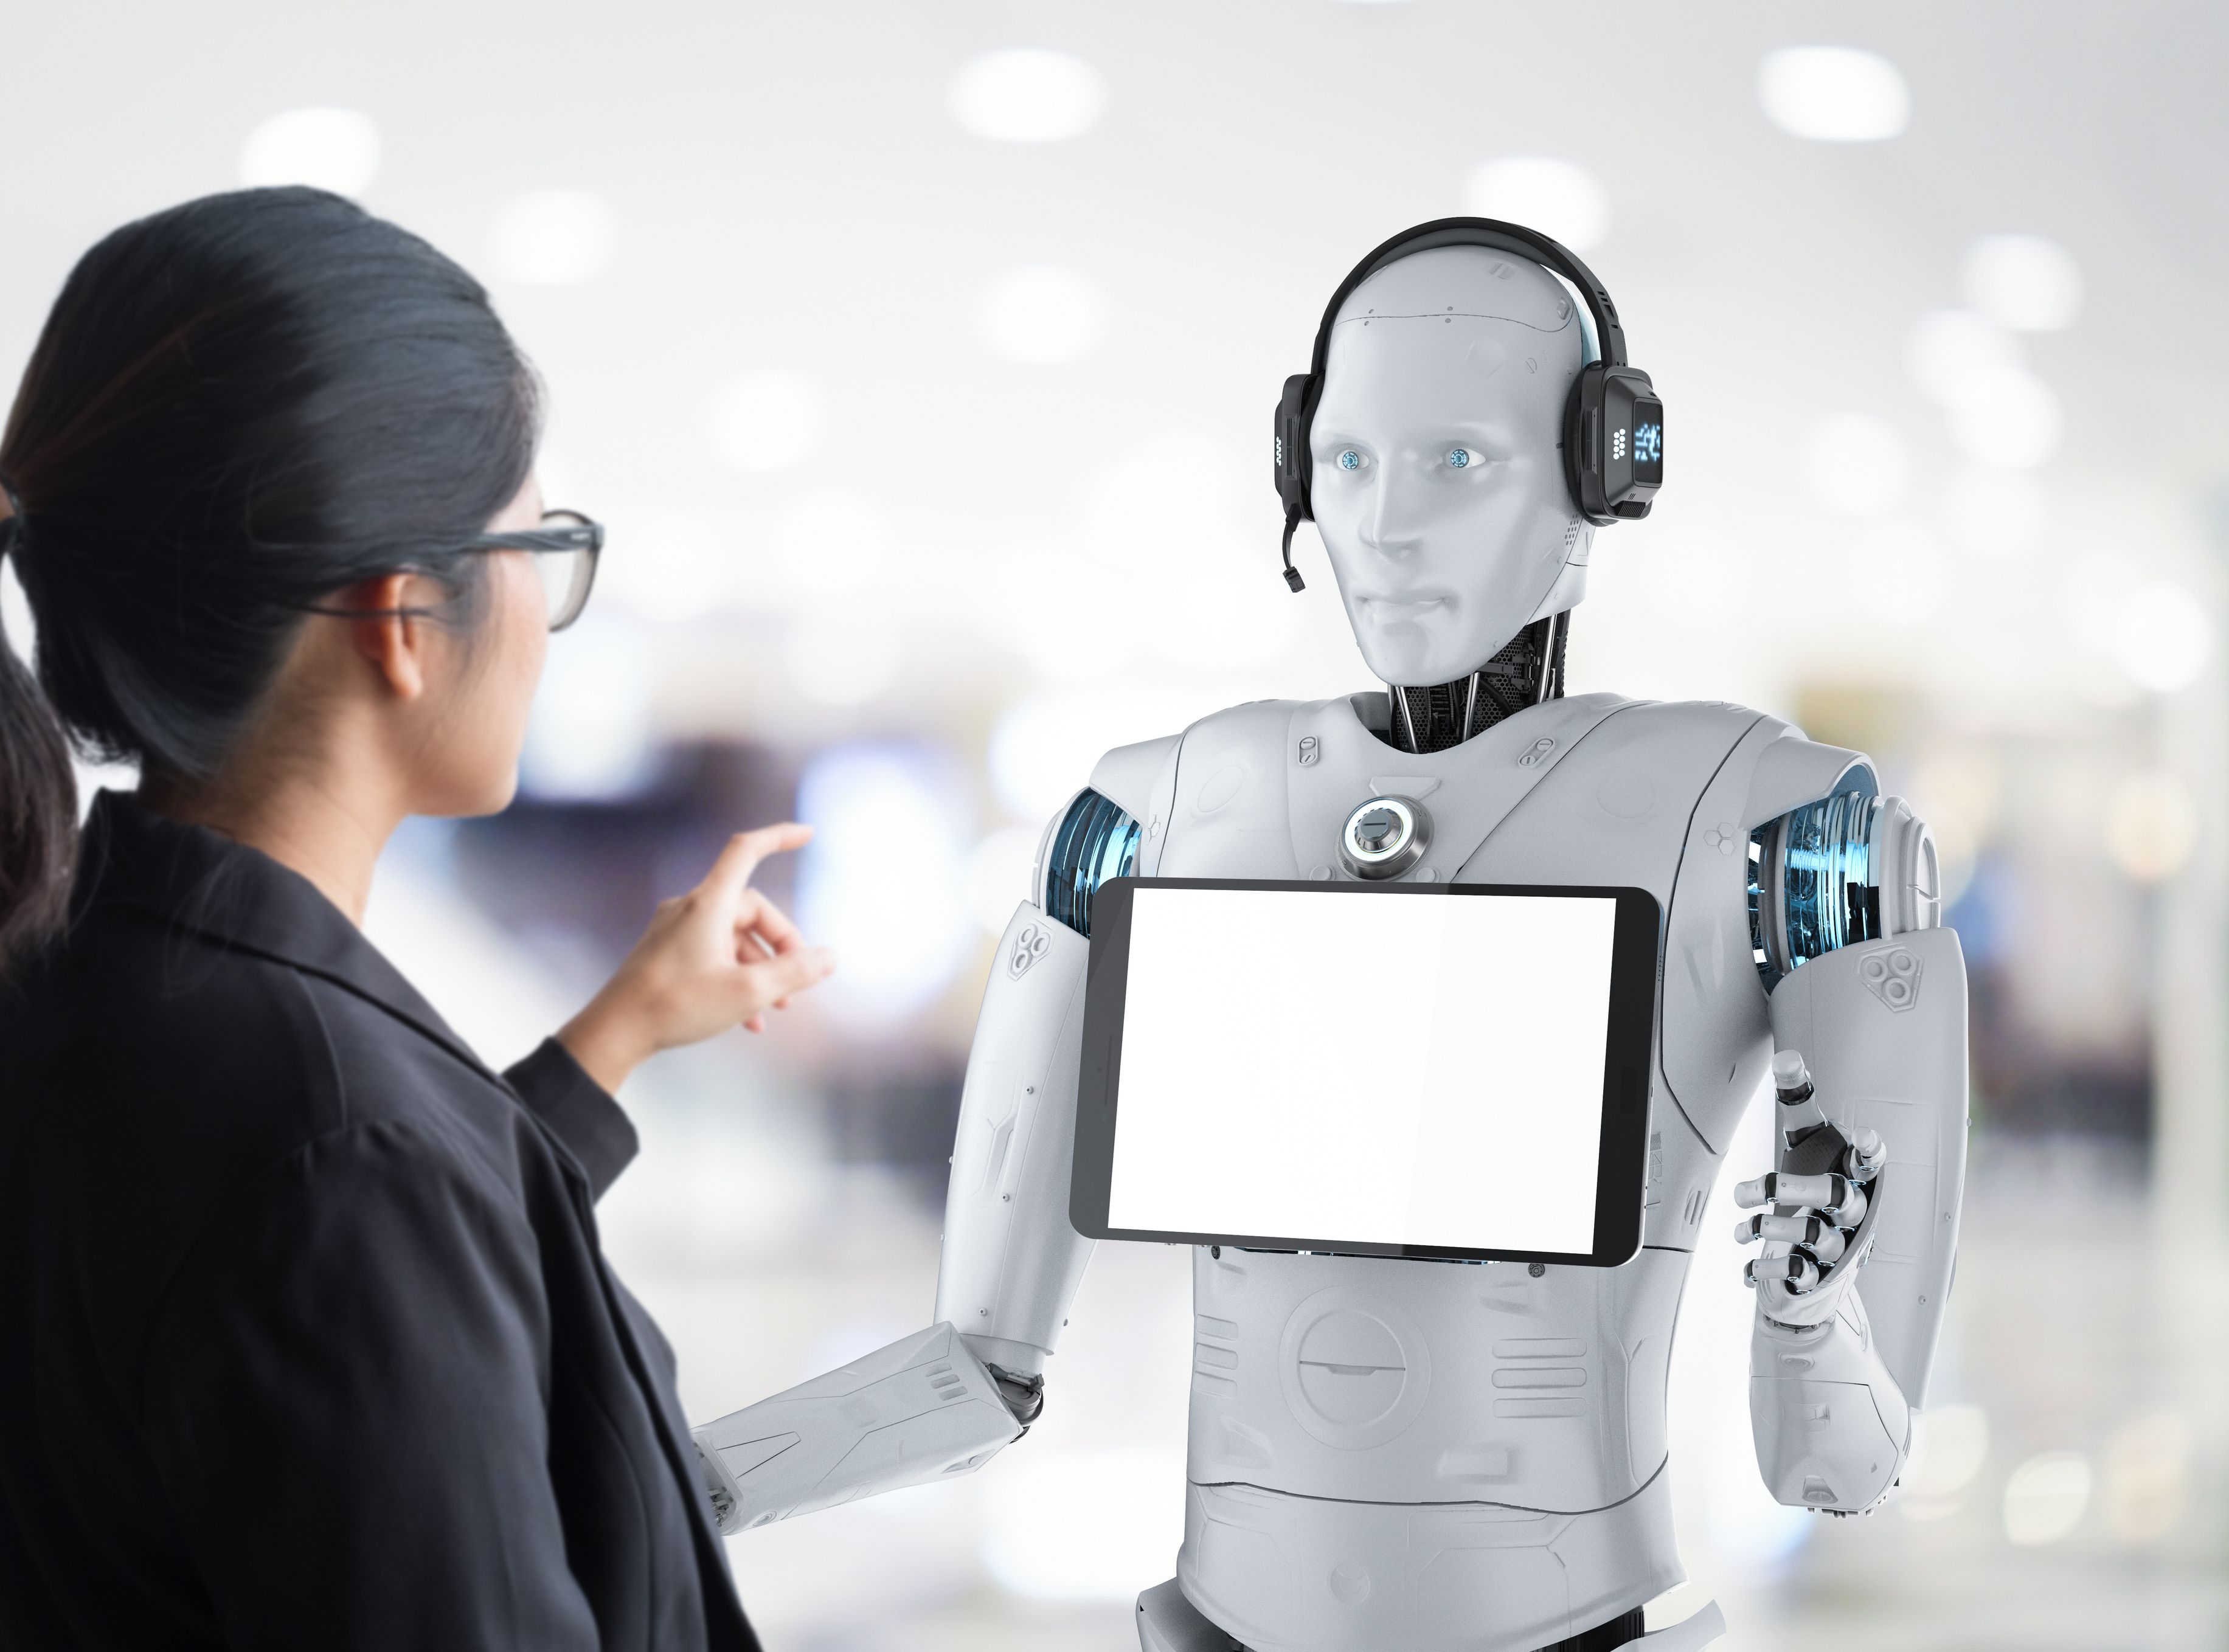 Image 1: Collaboration between workers and conversational robotic technology is the future of AI, and is already being developed today.